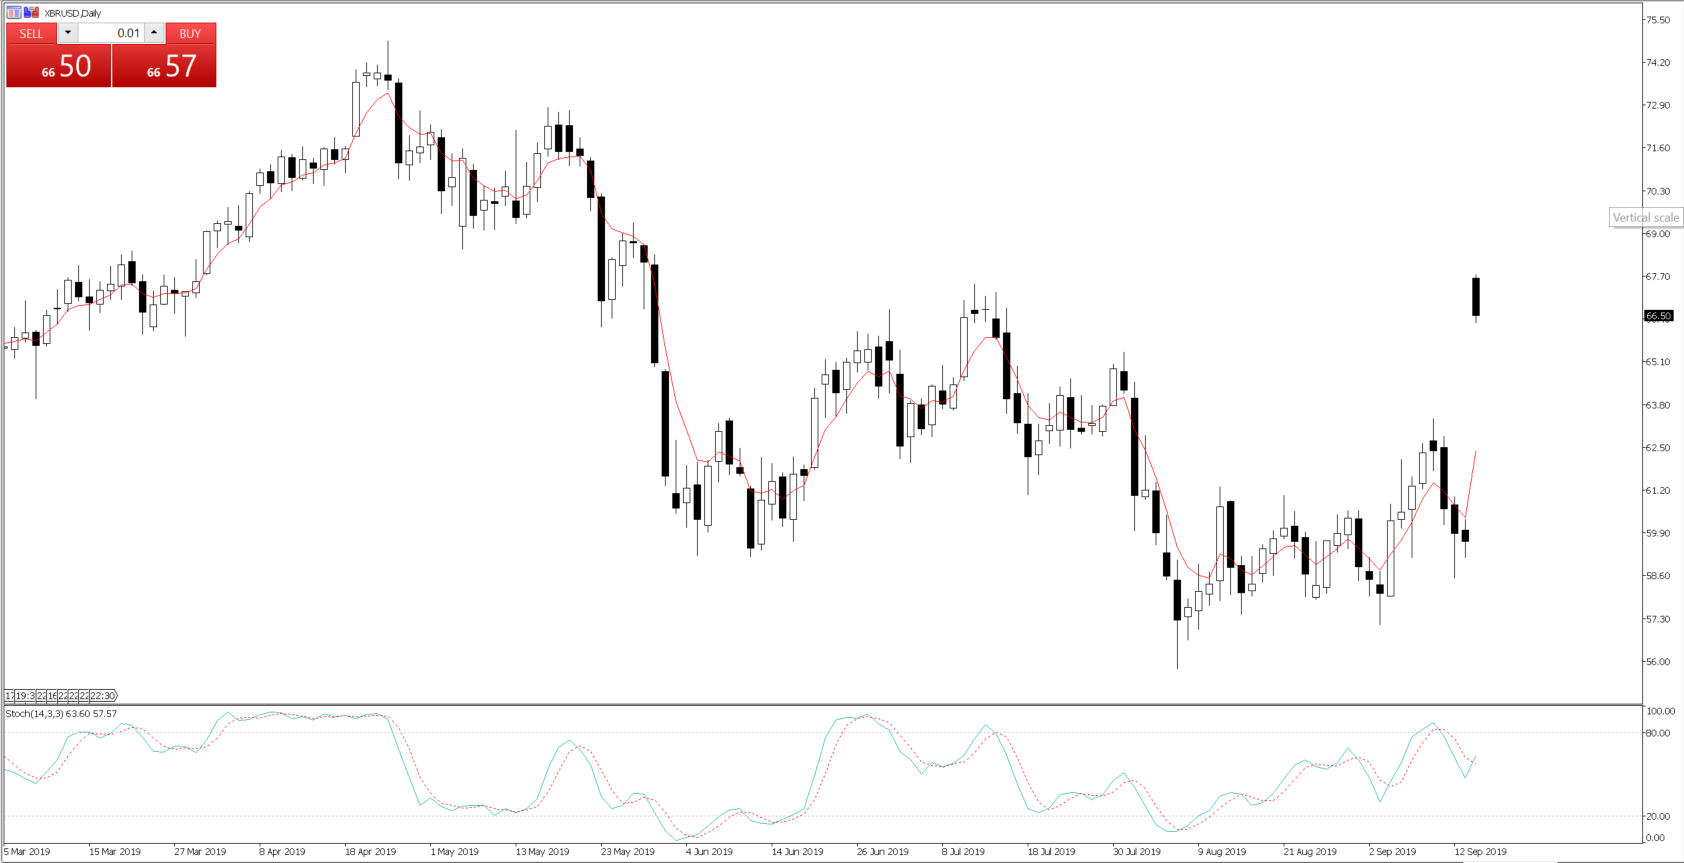 Brent Crude Daily Chart